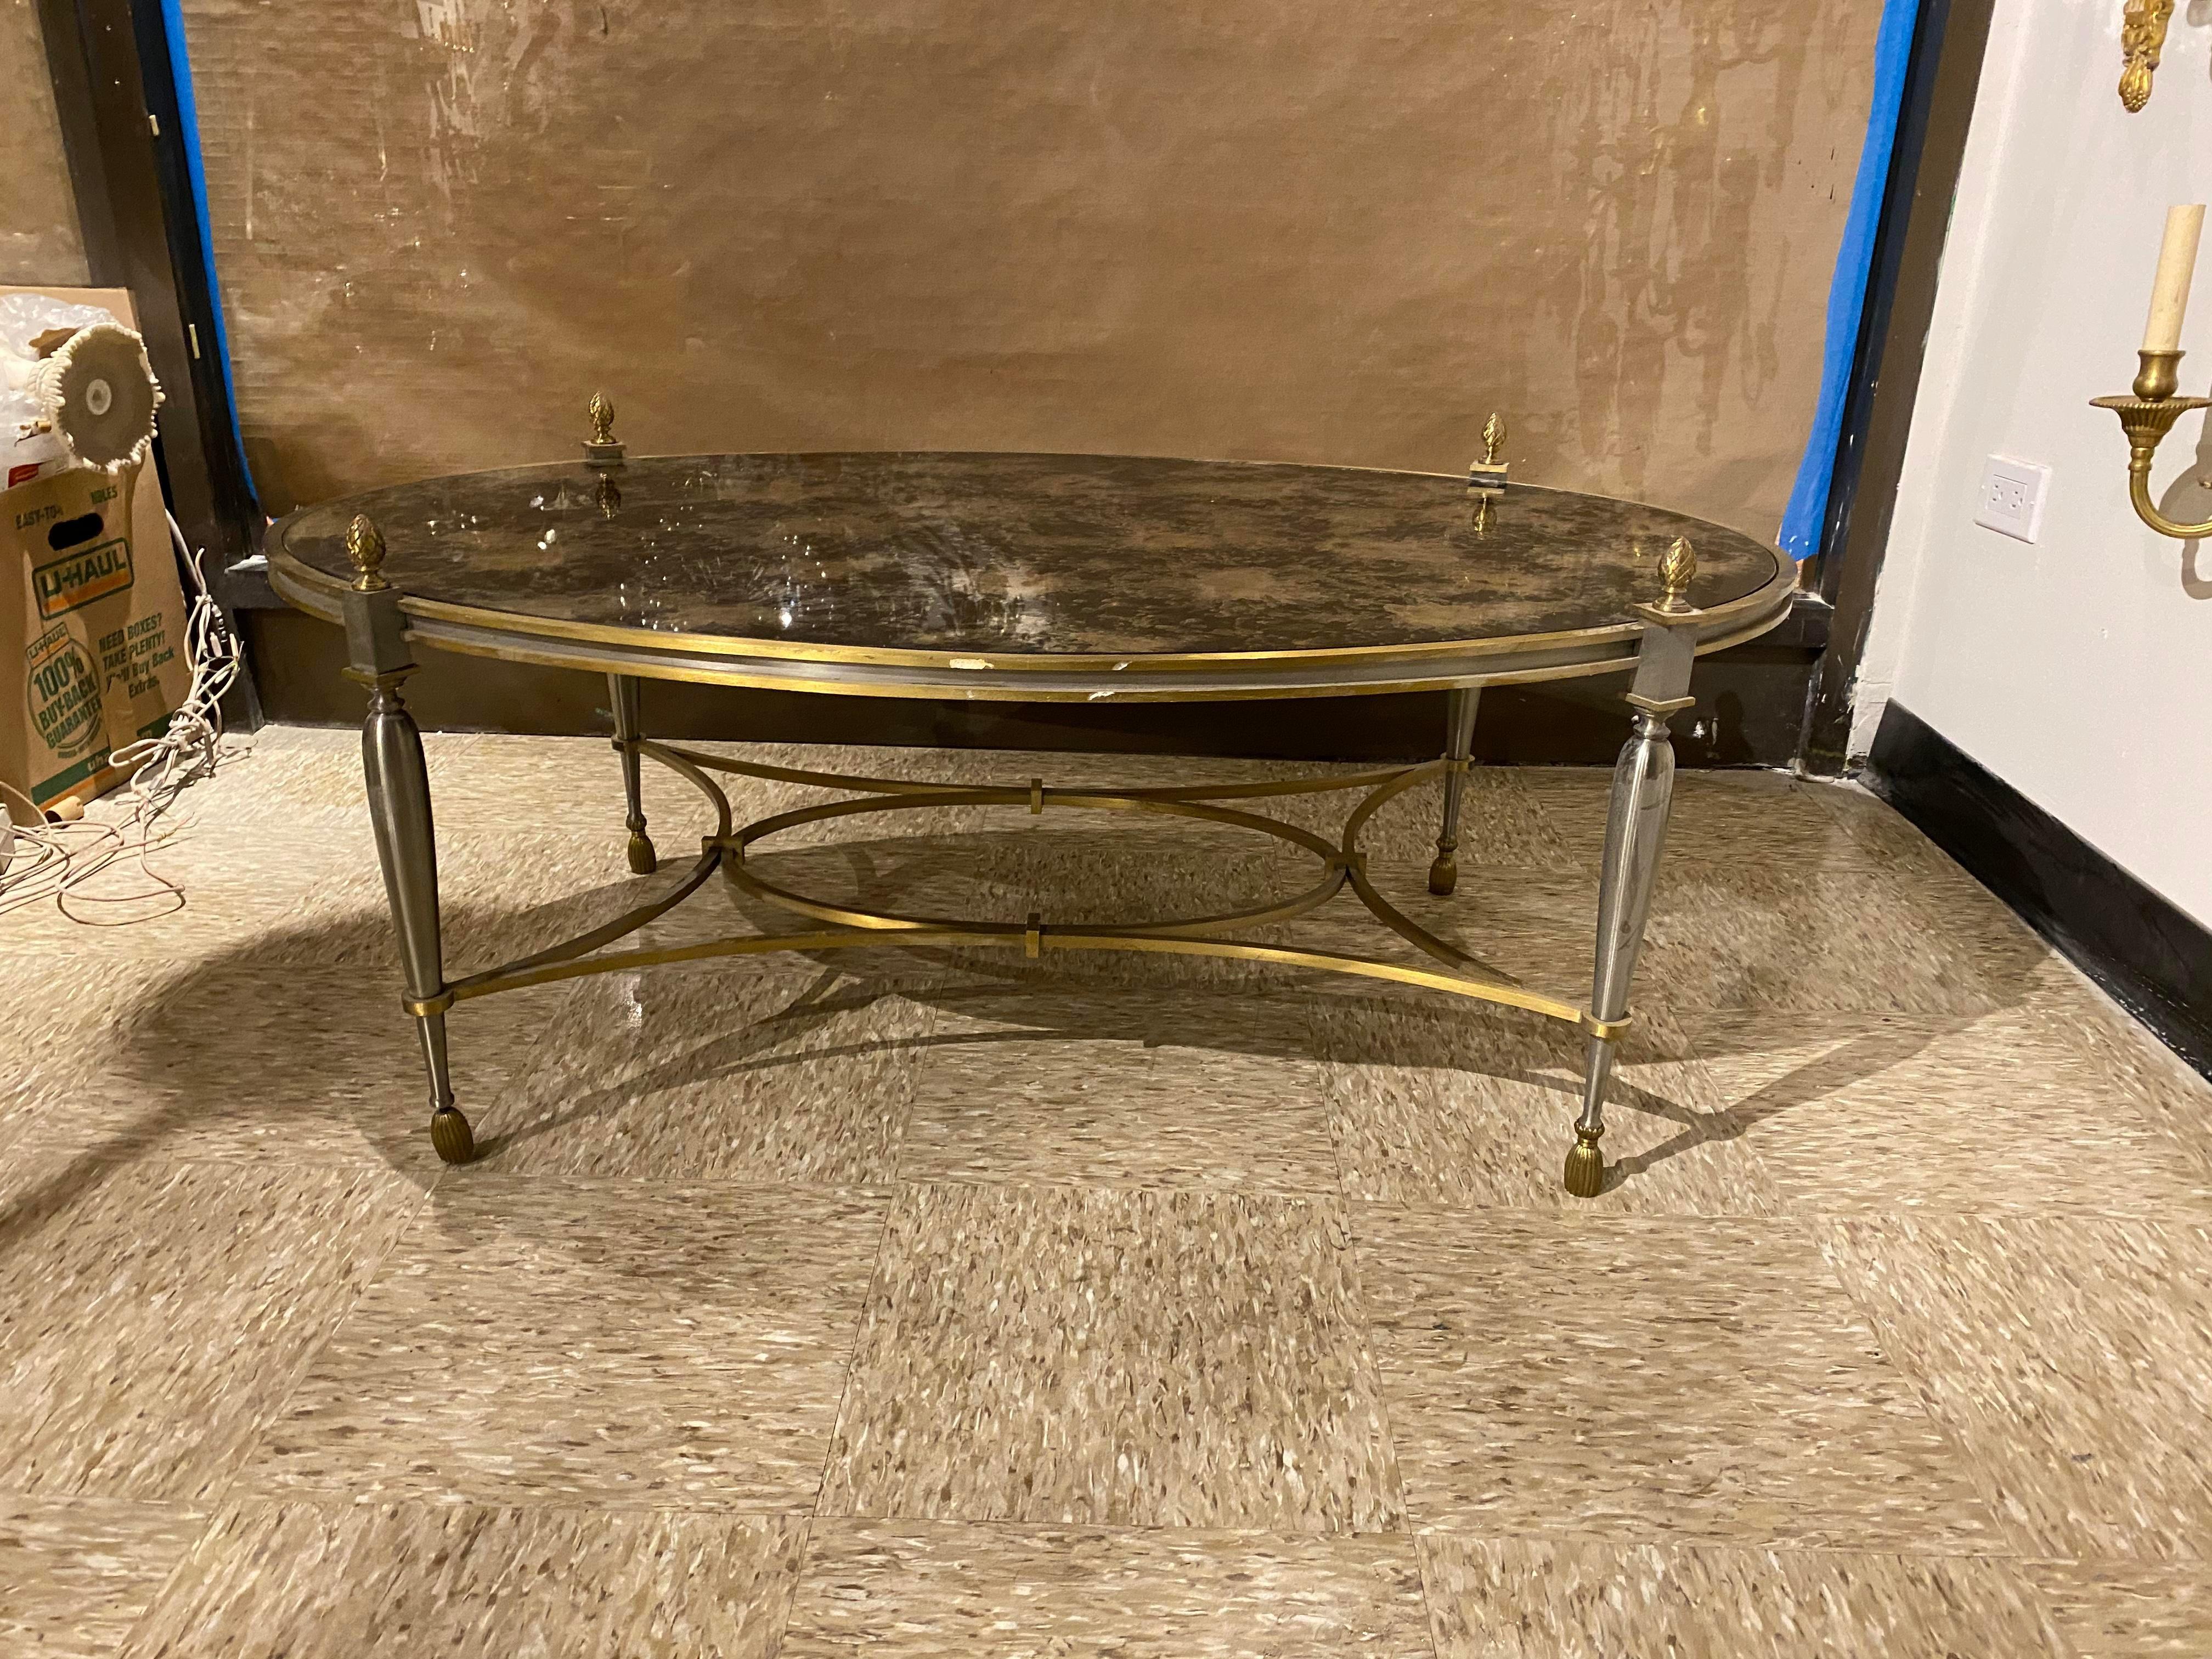 French Provincial A circa 1940's French mirrored coffee table unusual design